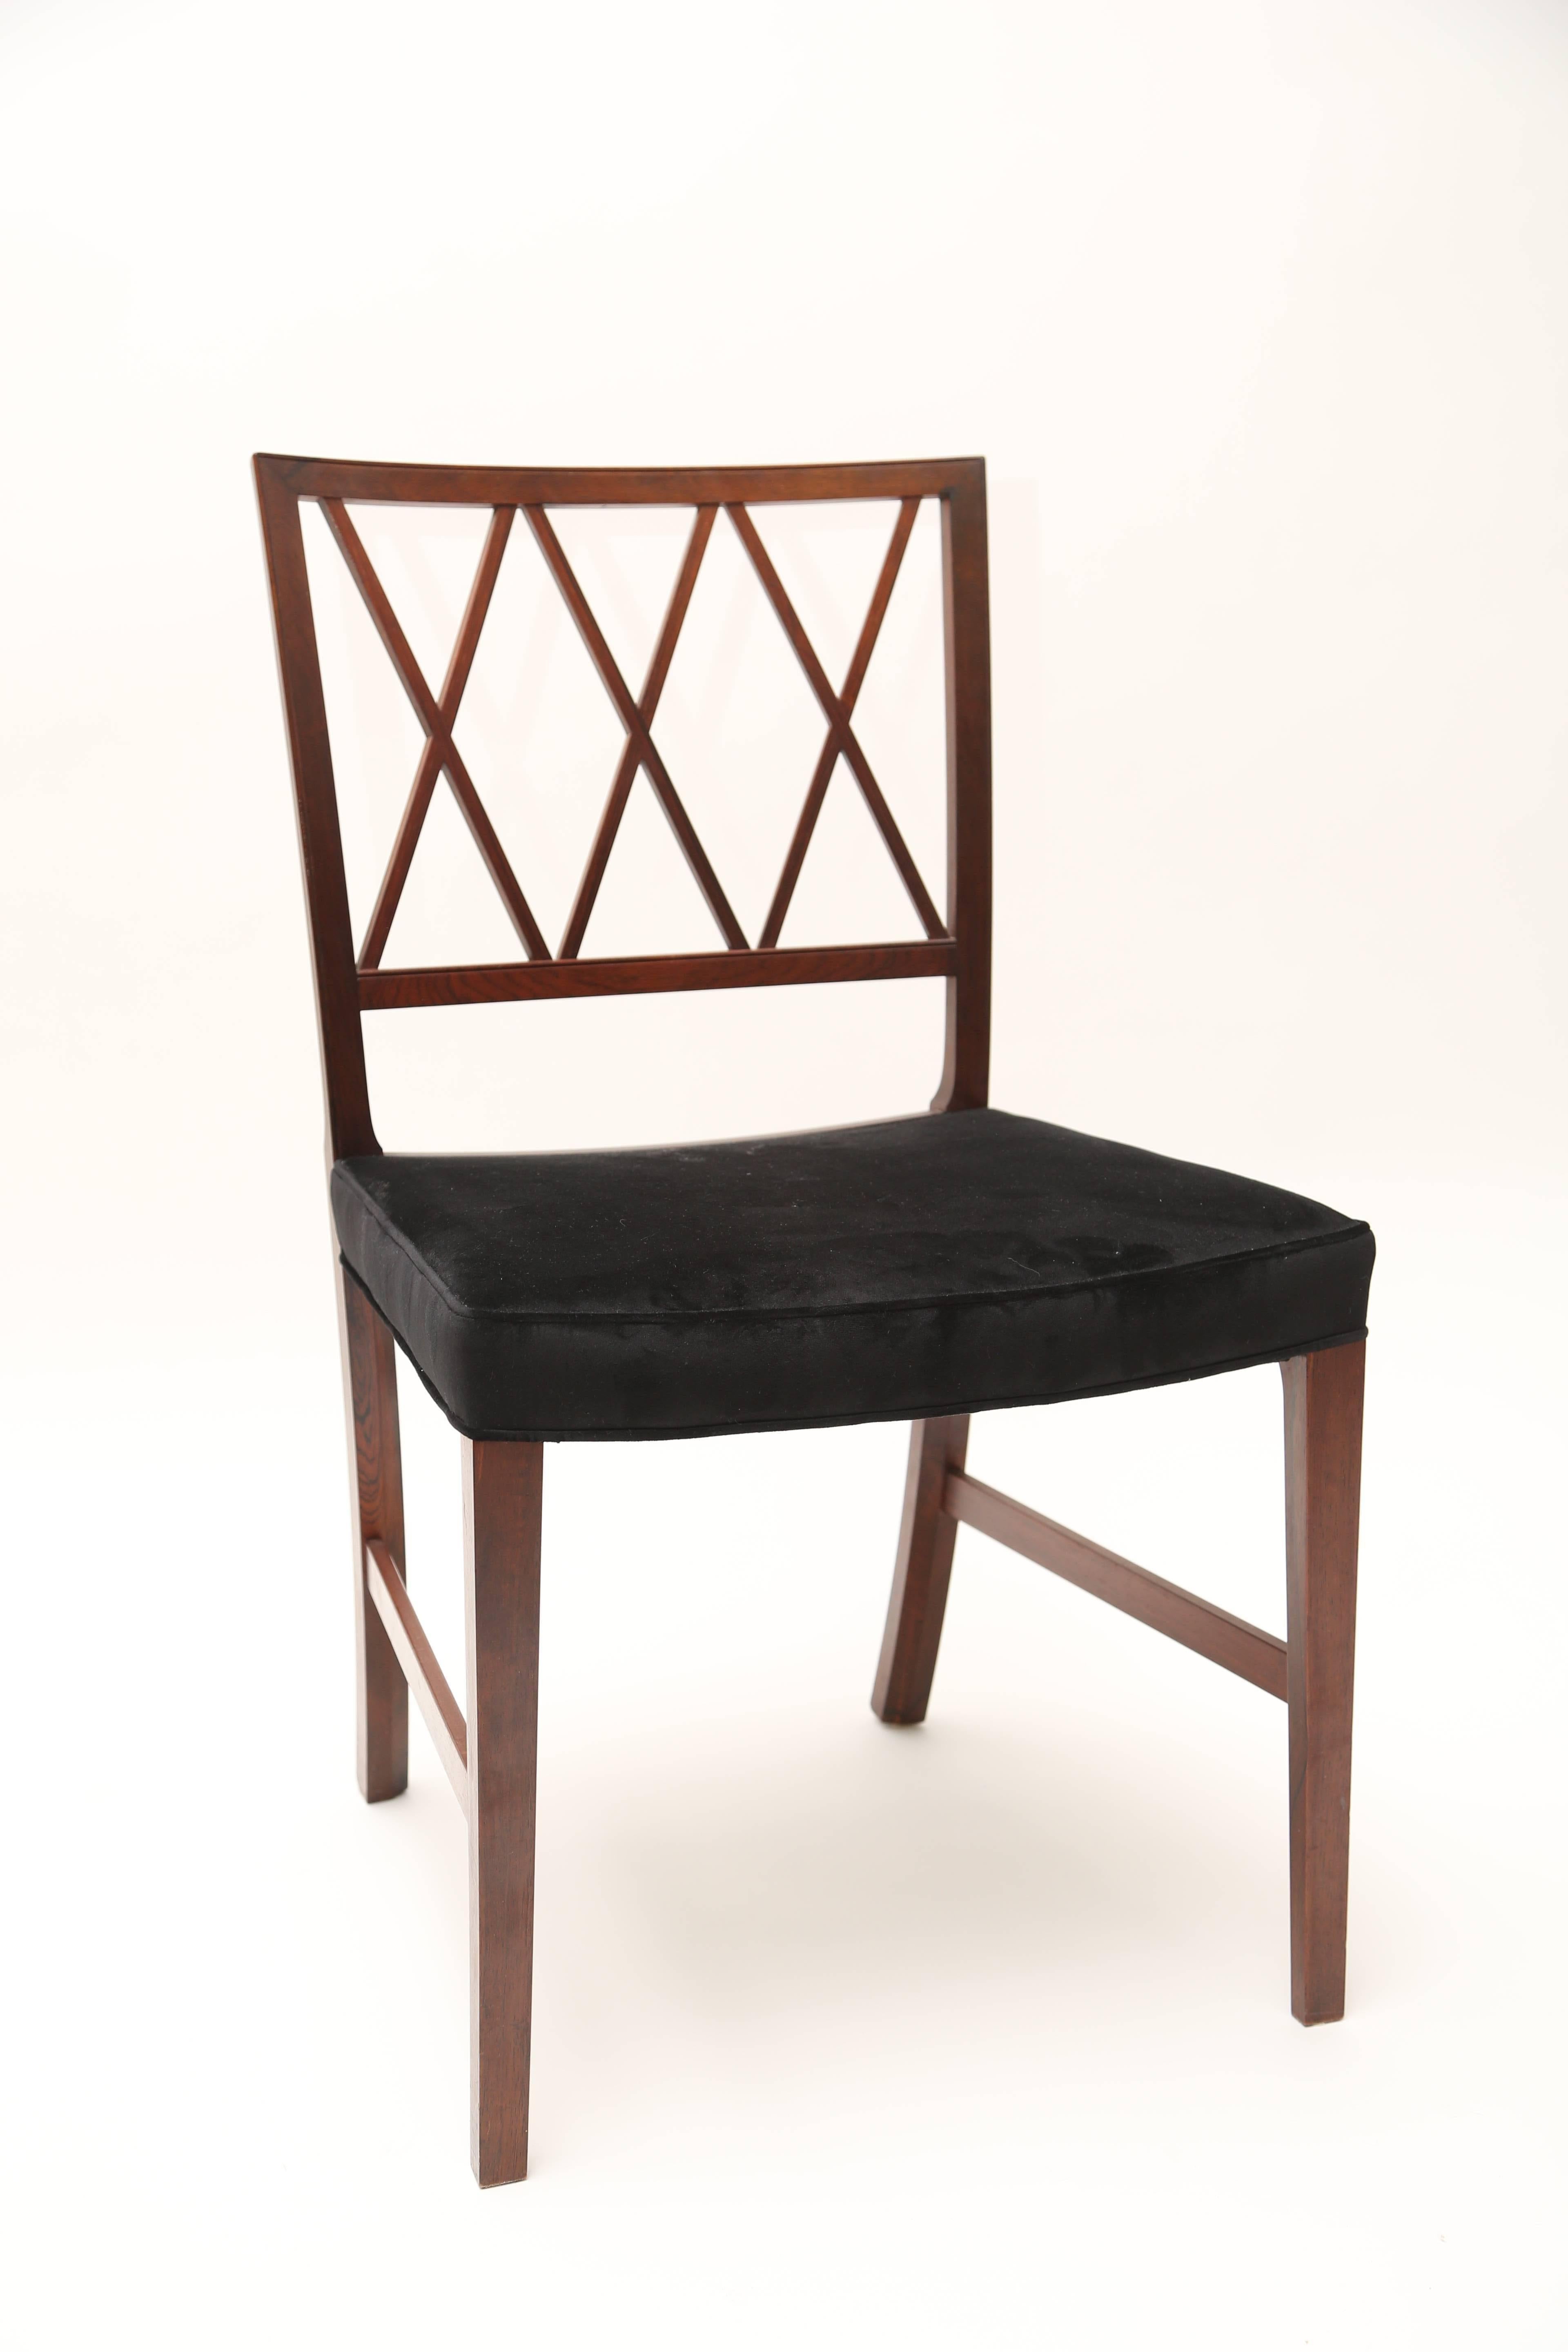 Elegant design
Beautiful rosewood
Two armchairs, four side chairs.